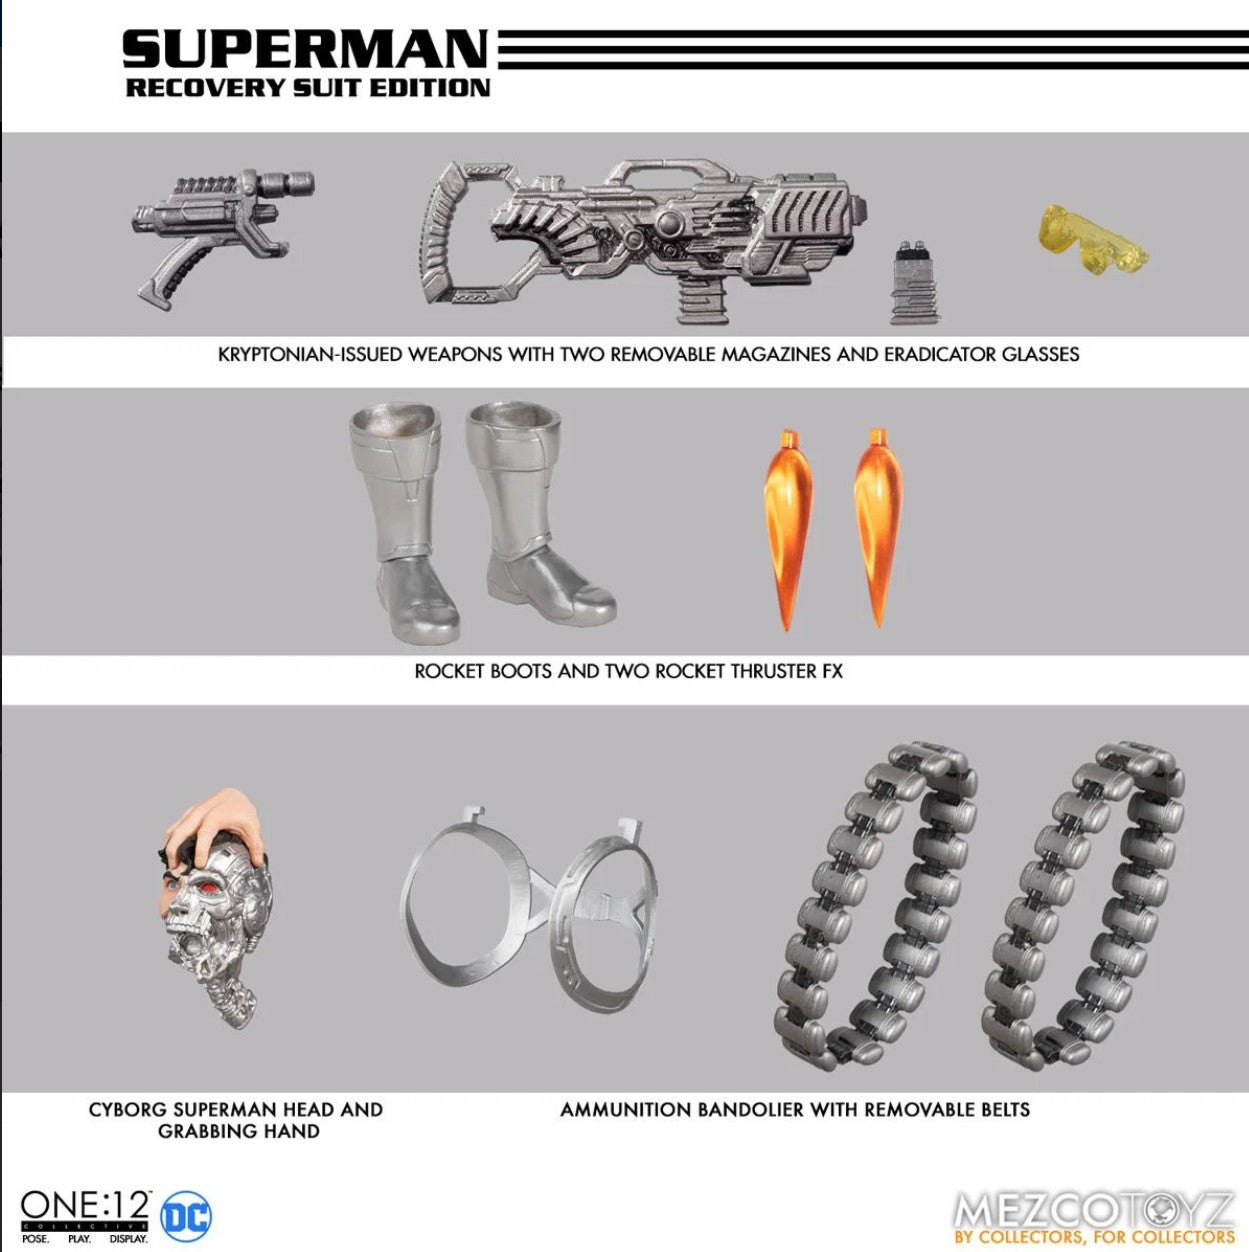 Superman Recovery Suit Edition weapons